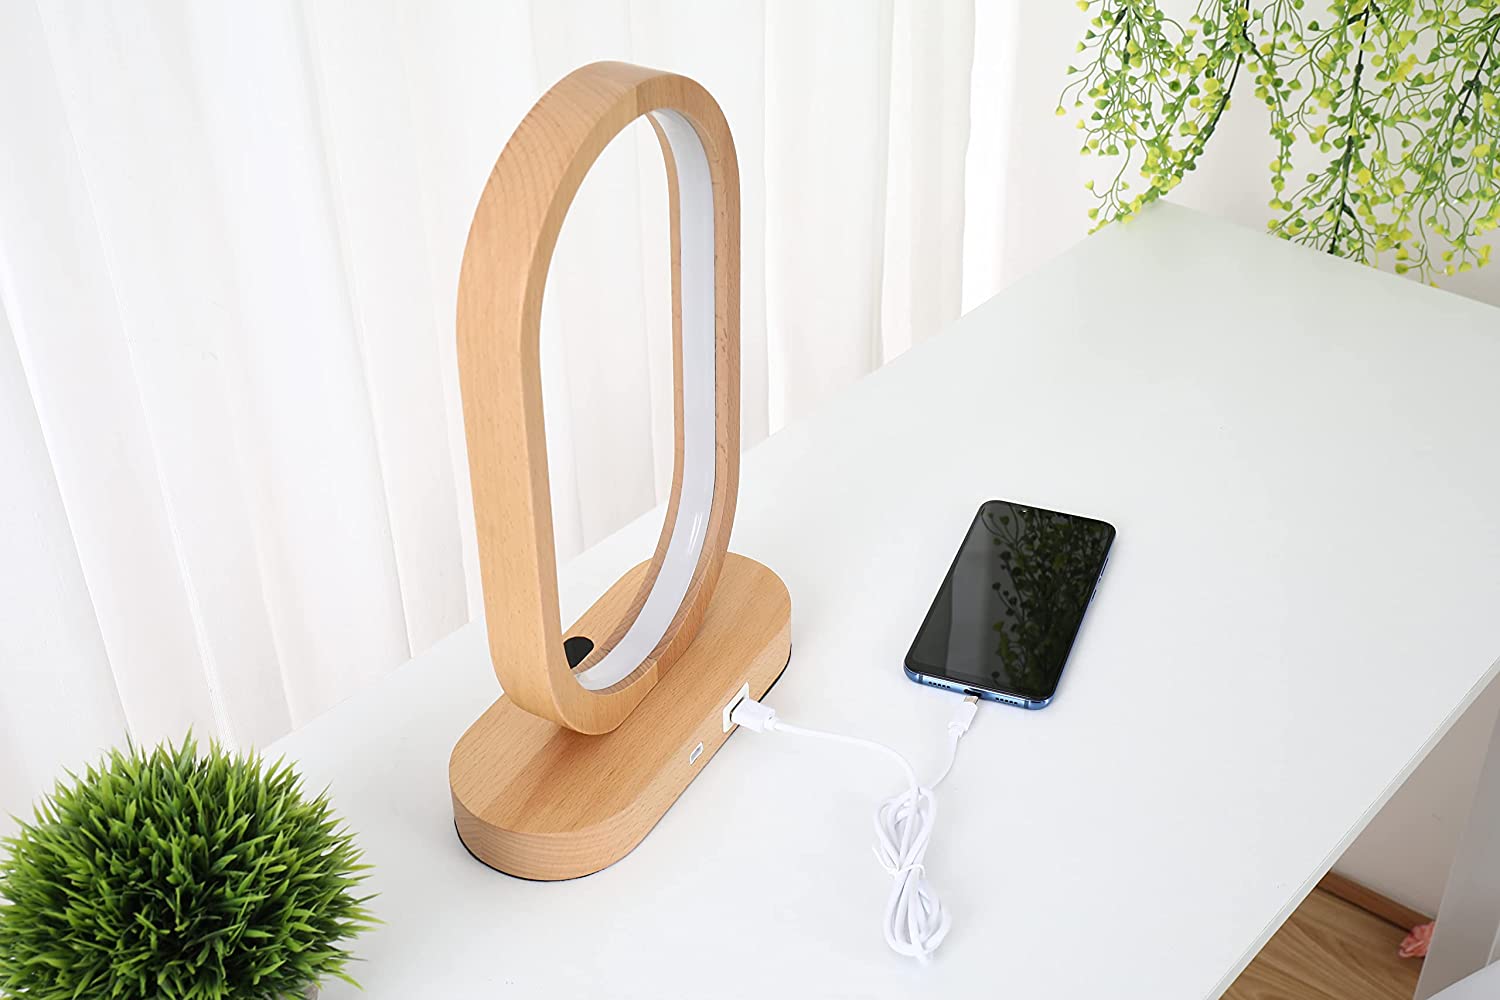 Desk Mood Lamp, Wooden Table Lamp, 3 light mode Ambient Lamp With Gesture & Touch Control By Daamudi online